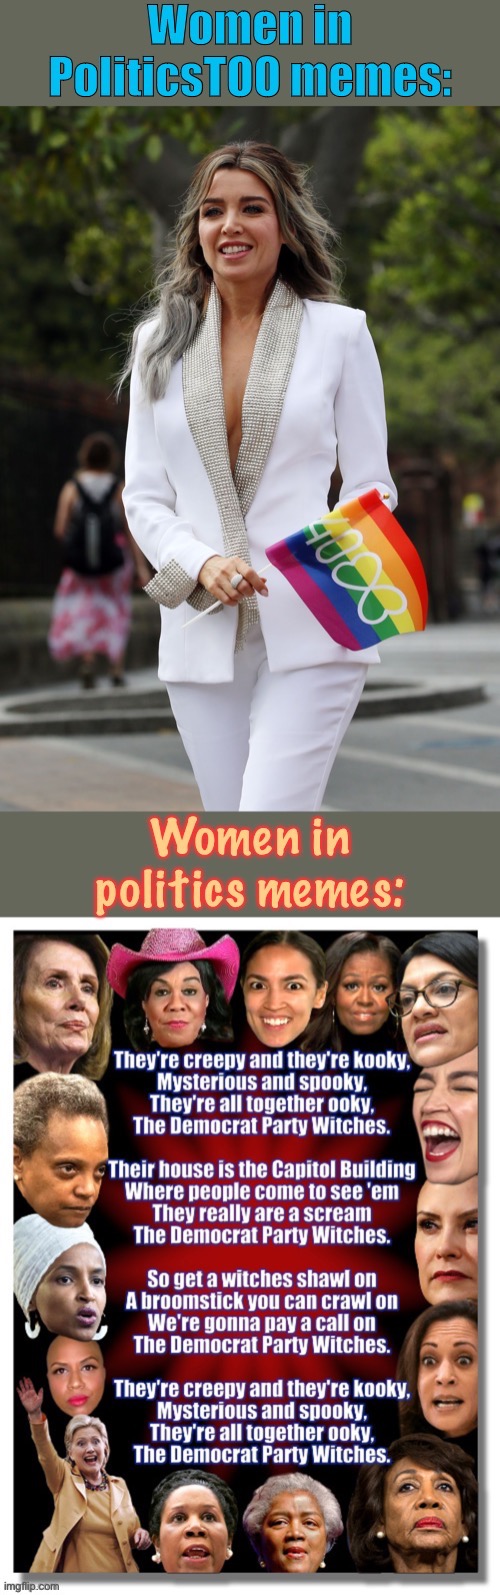 Shameless plug for PoliticsTOO. | image tagged in sexism,memes about memes,memes about memeing,lgbt,gay rights,politics | made w/ Imgflip meme maker